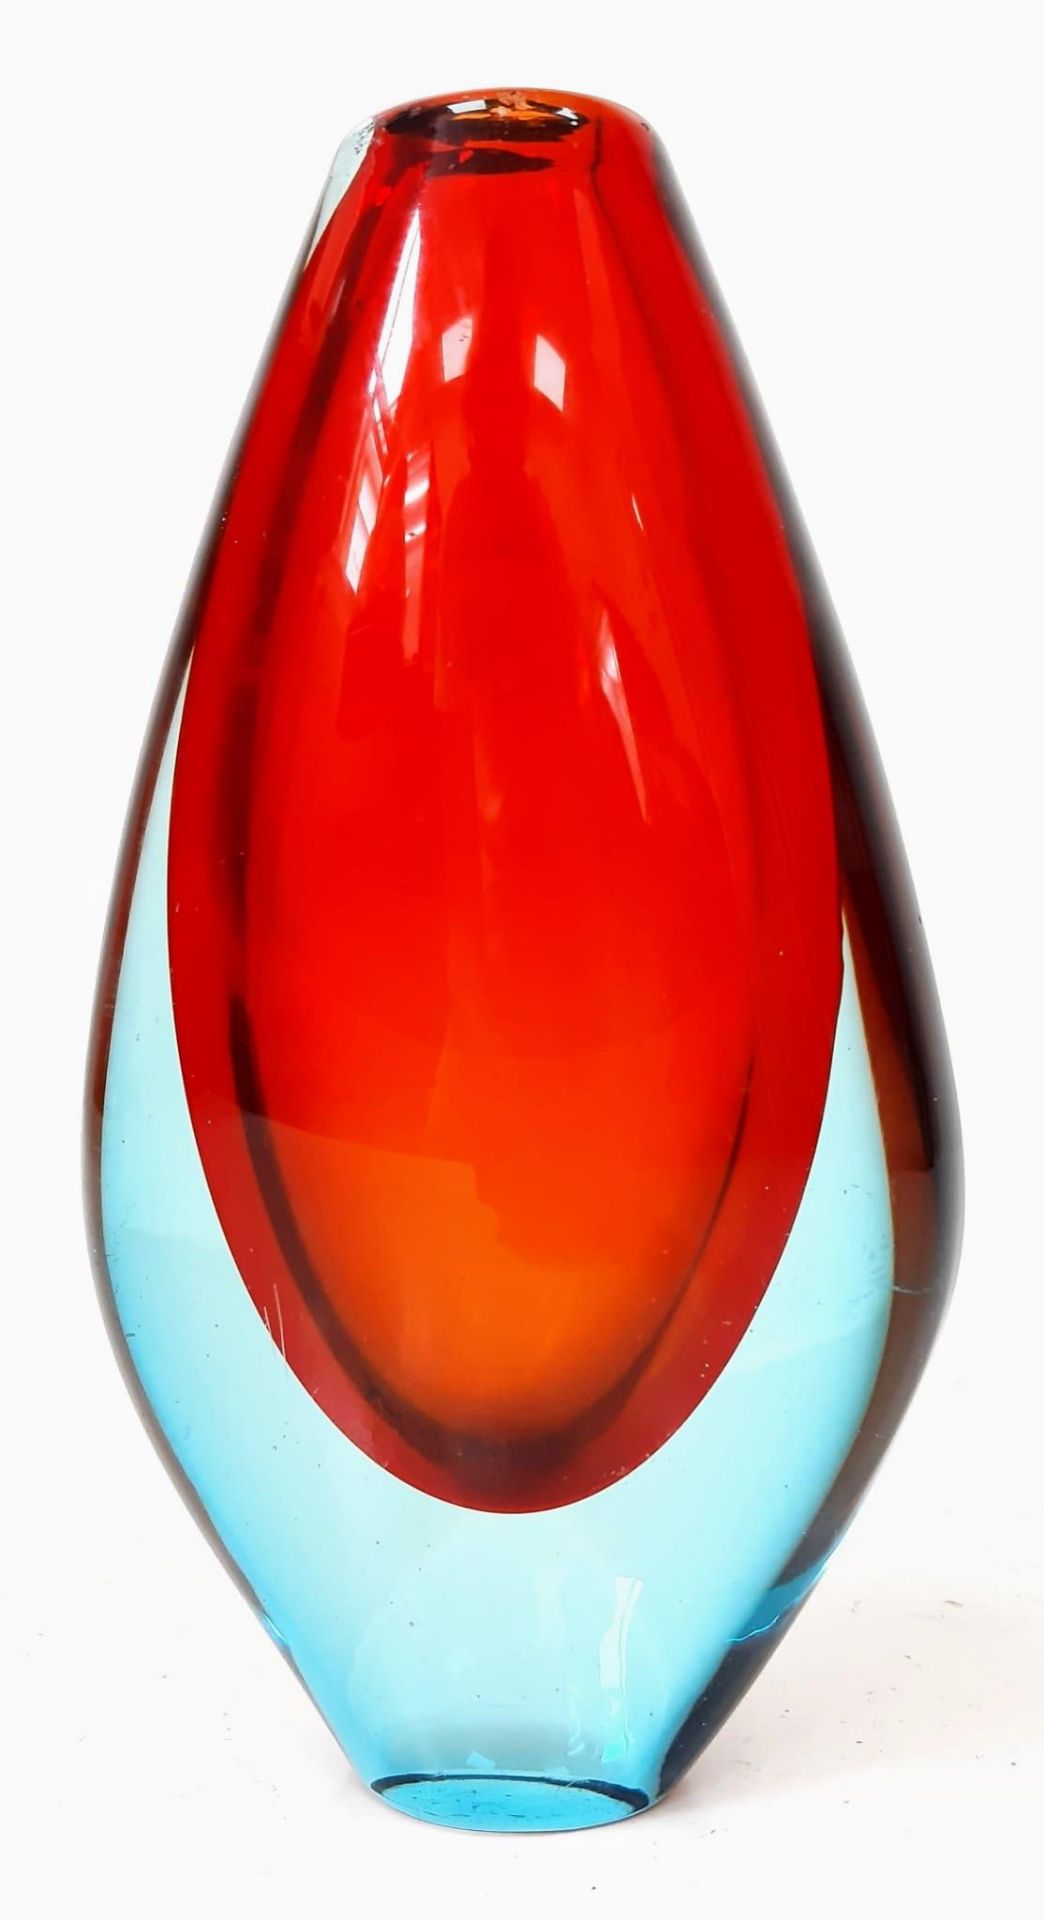 A Murano-Inspired Fire-Red and Sky-Blue Decorative Glass Vase. 24cm tall - Image 3 of 6